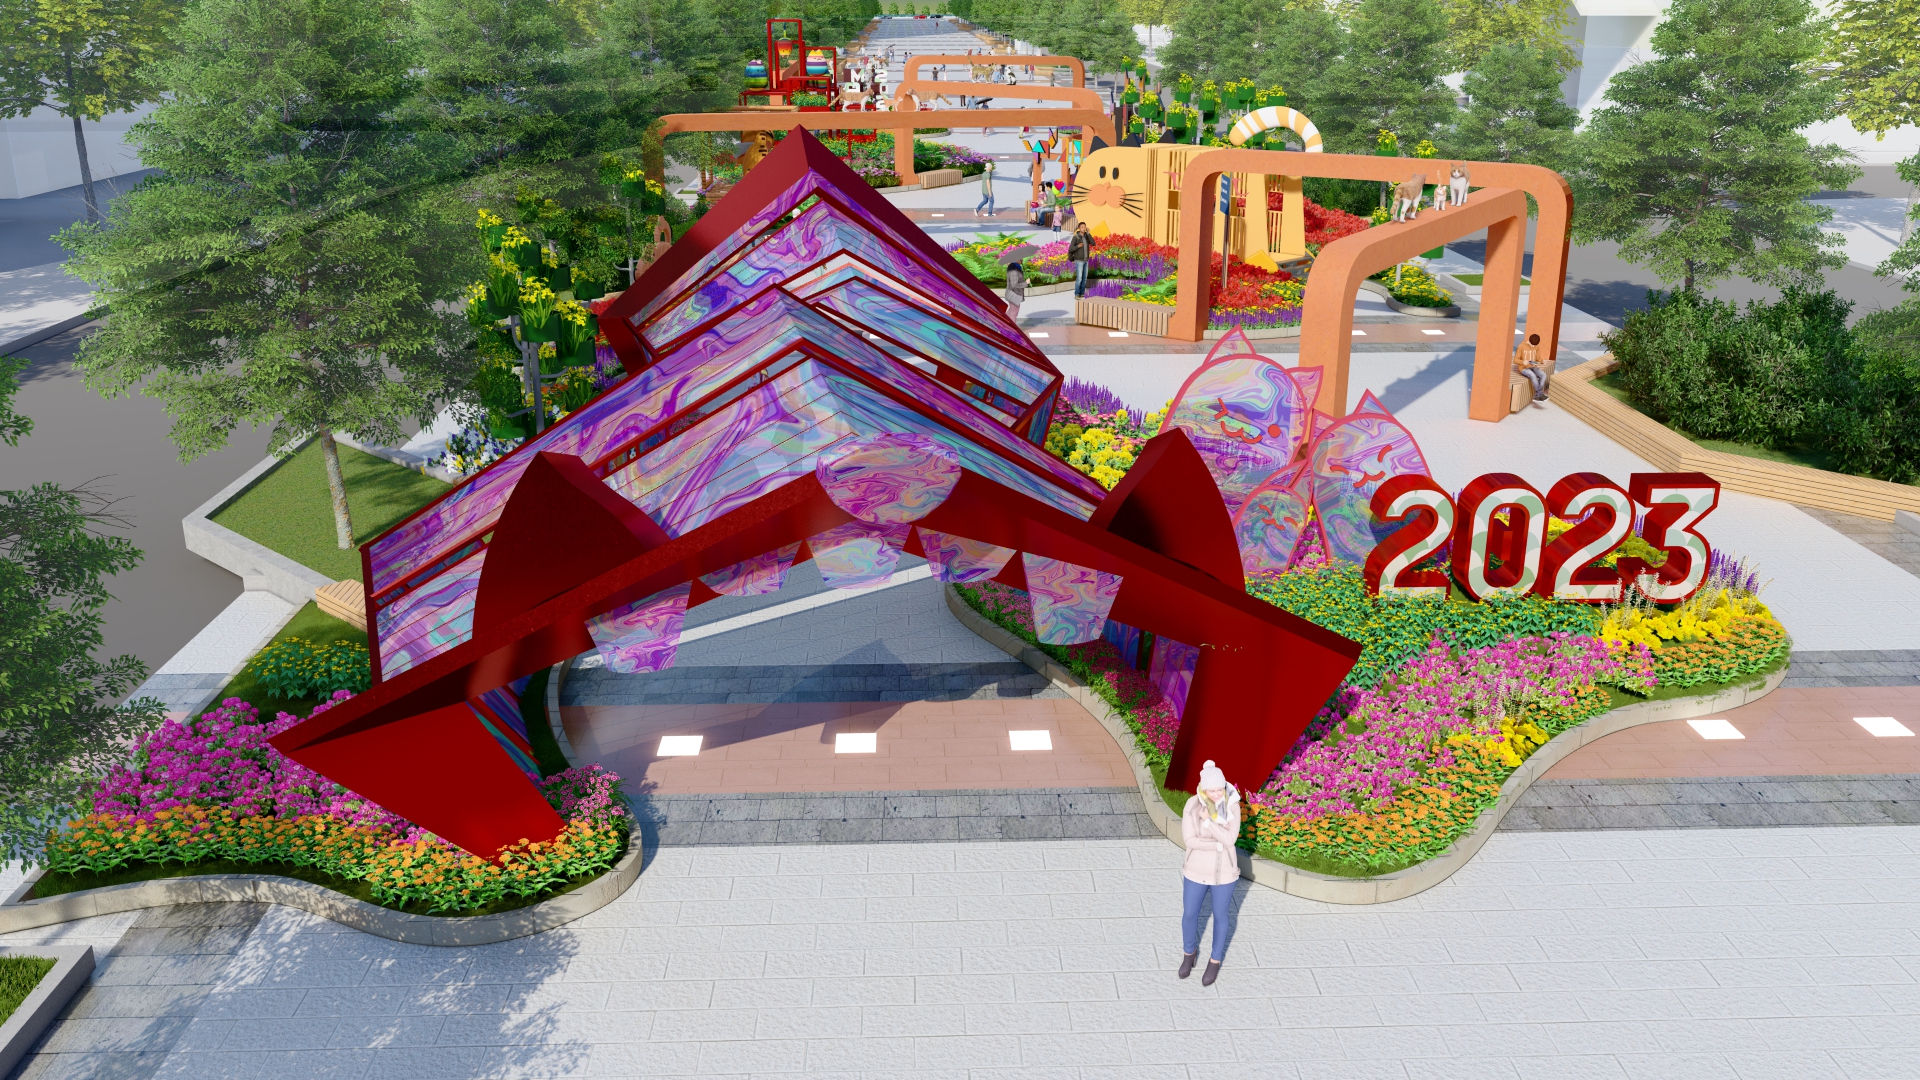 An architect’s impression of a section along the 2023 Nguyen Hue Flower Street in District 1, Ho Chi Minh City.